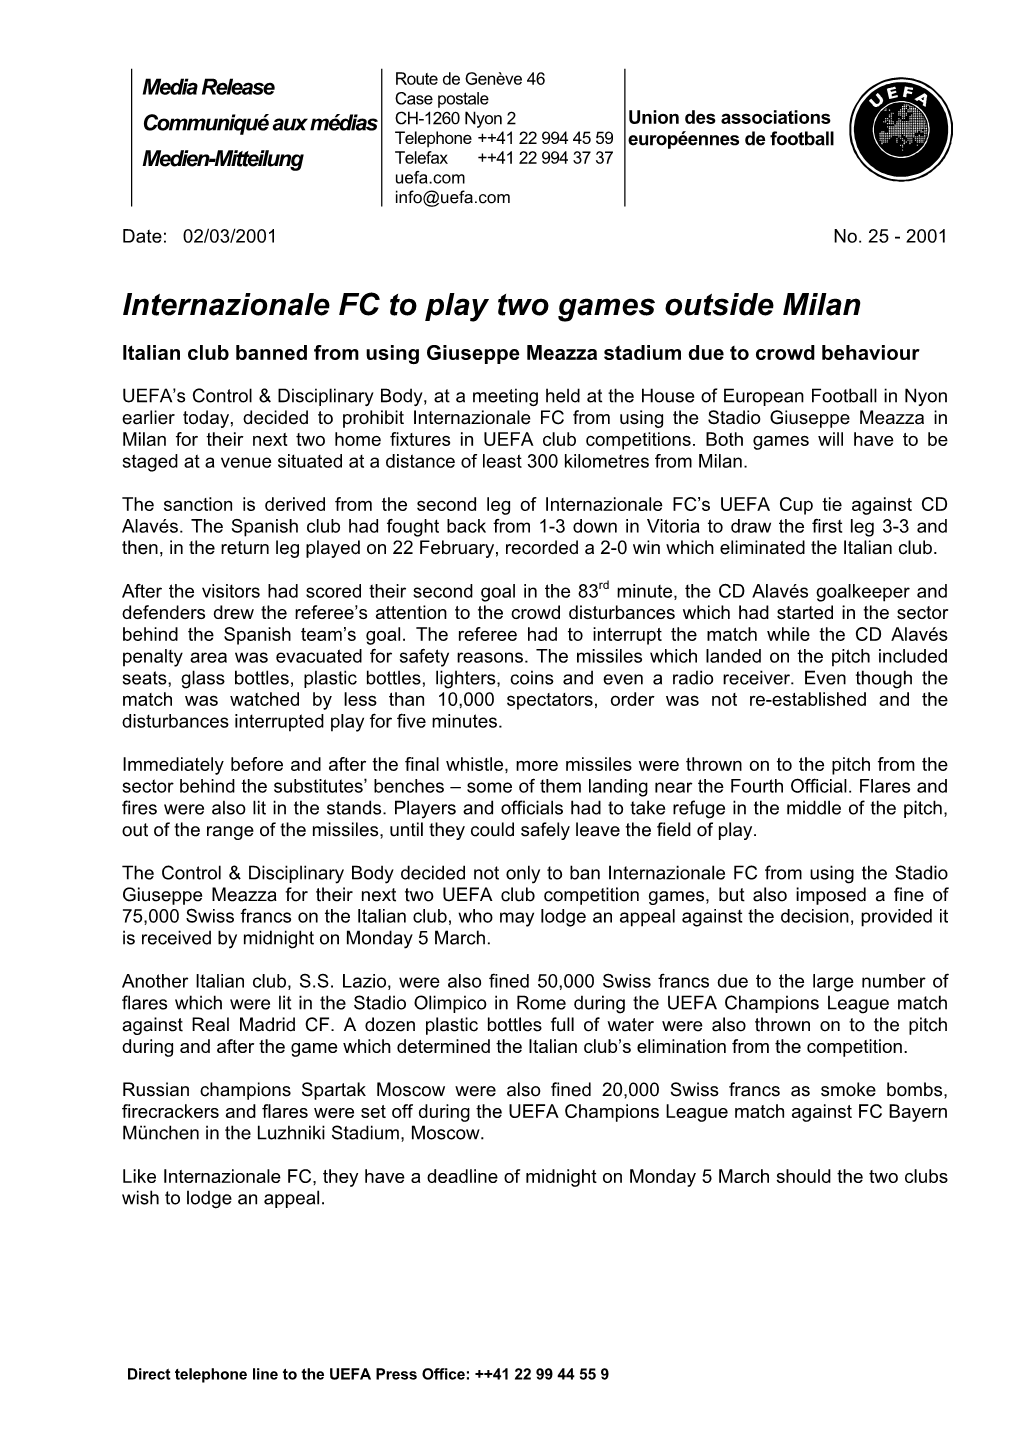 Internazionale FC to Play Two Games Outside Milan